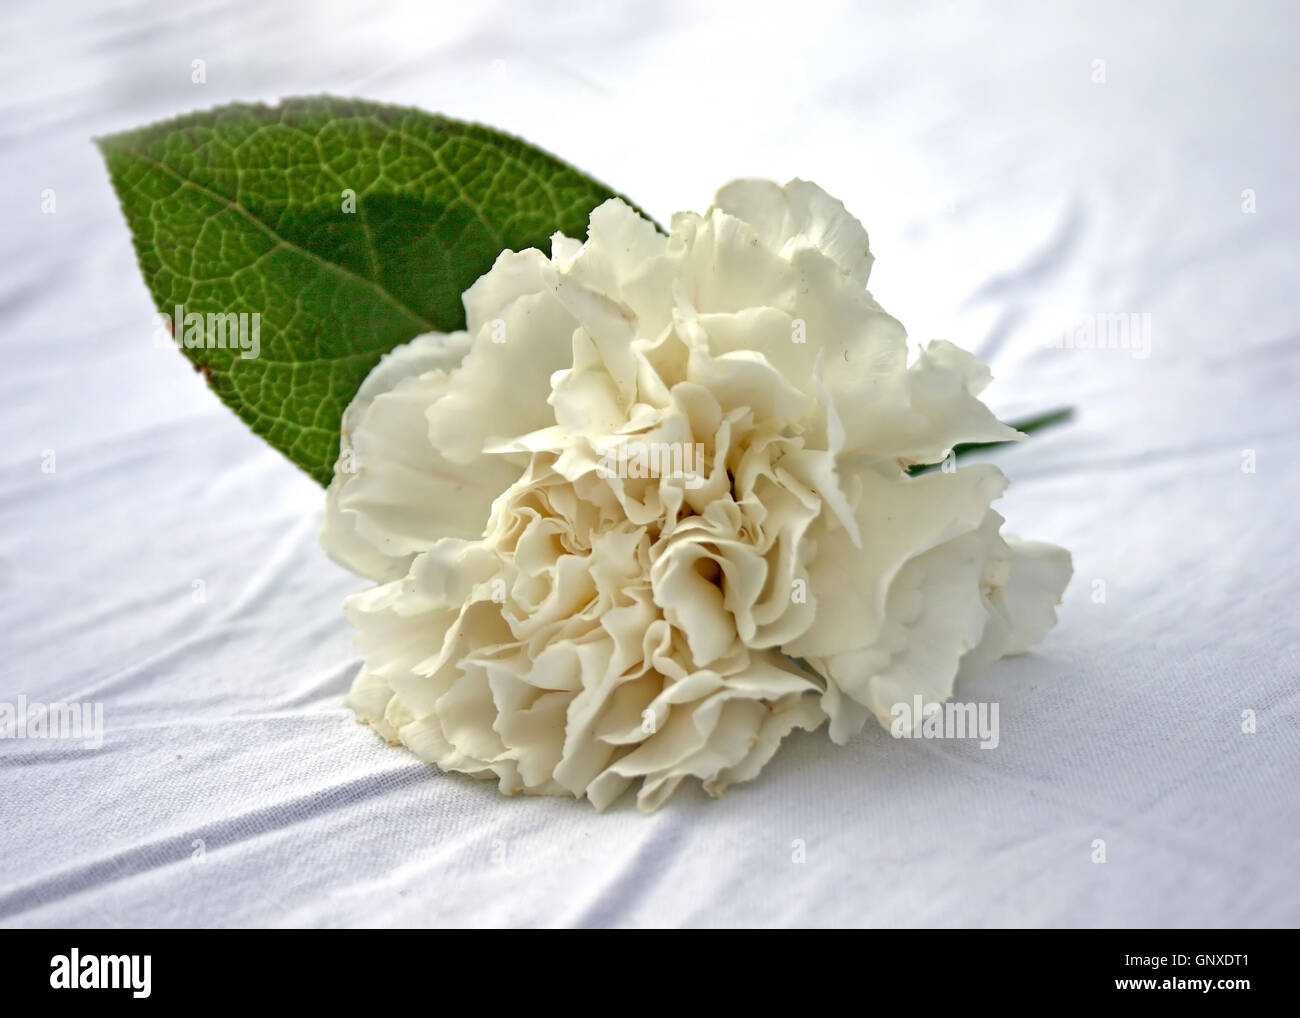 A flower for a corsage sitting on a table Stock Photo